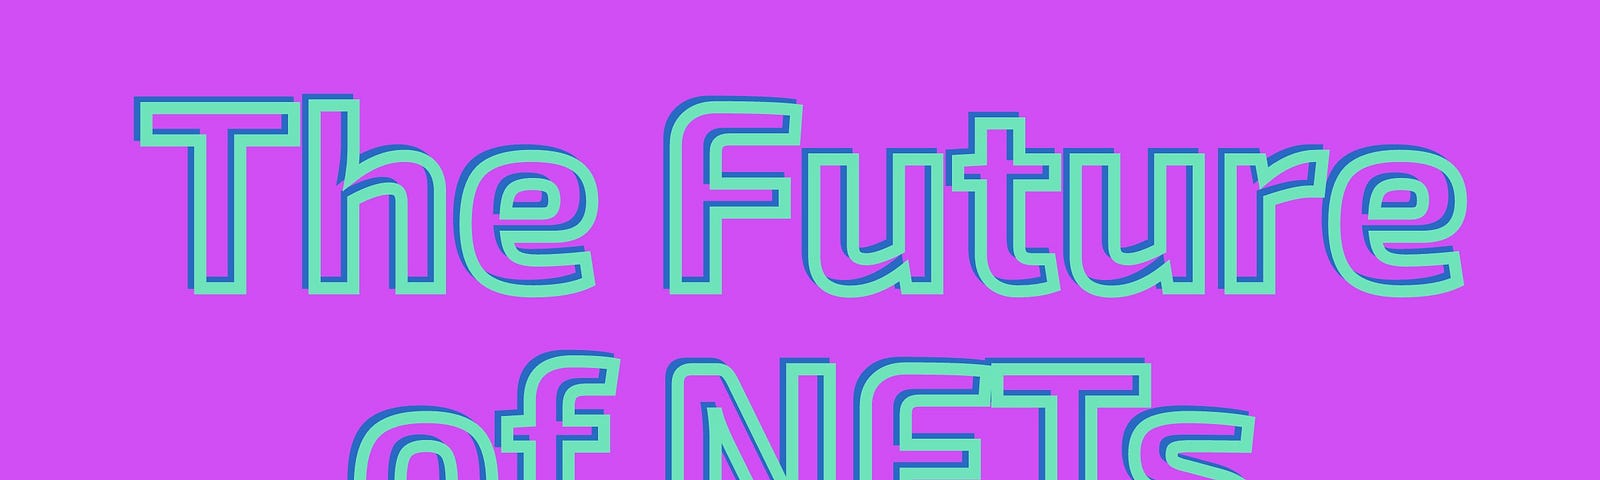 An illustration on a purple background with the title “The Future of NFTs” in a blue futuristic font.